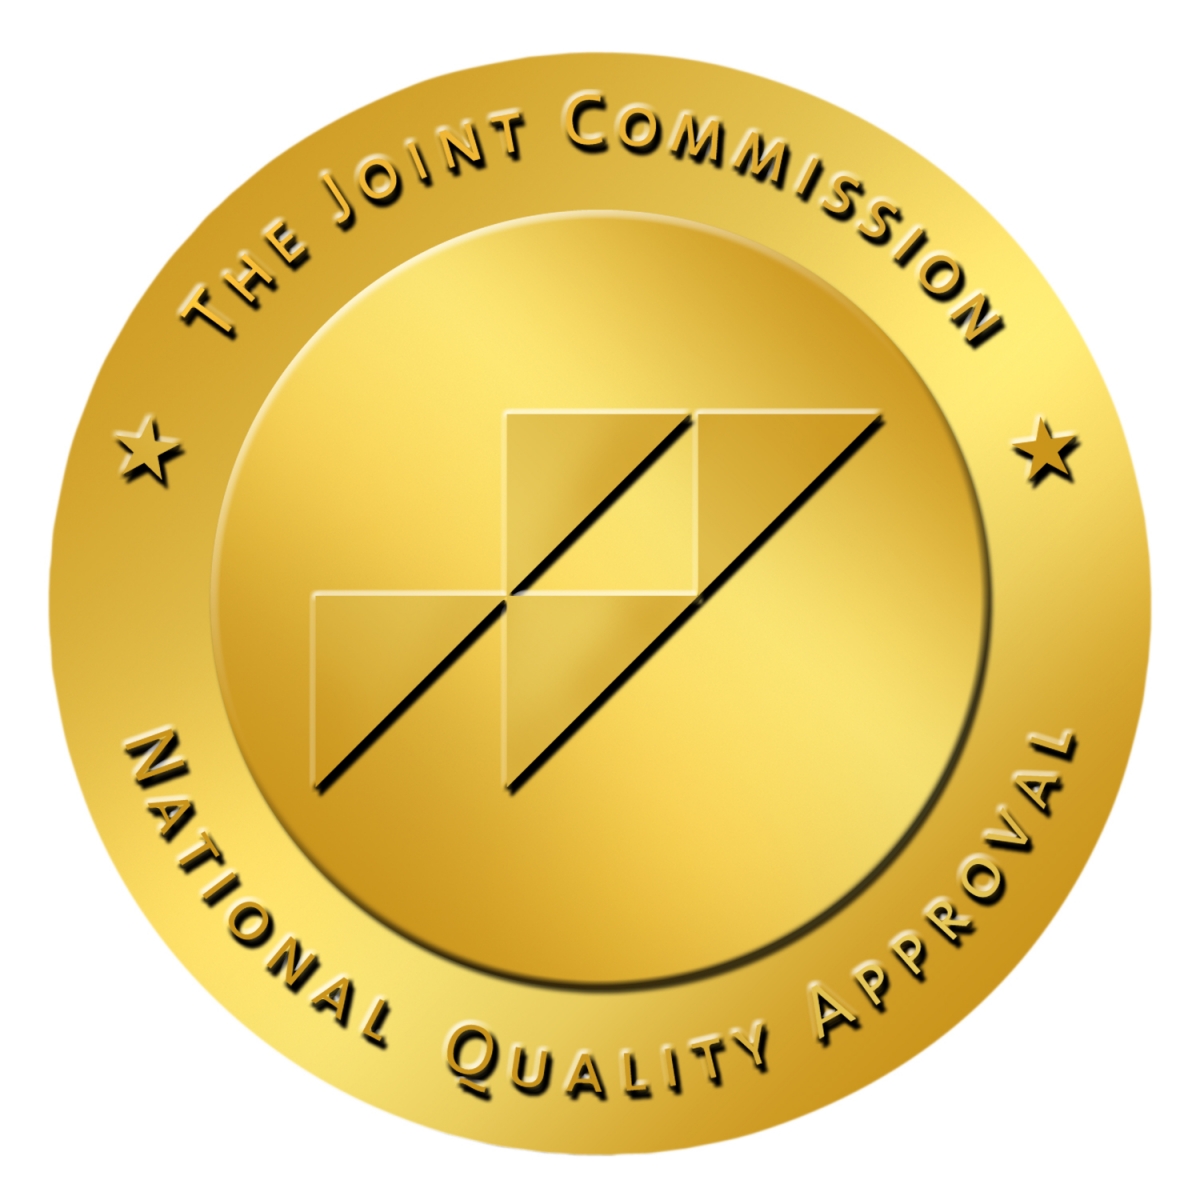 The Joint Commission Gold Seal of Approval